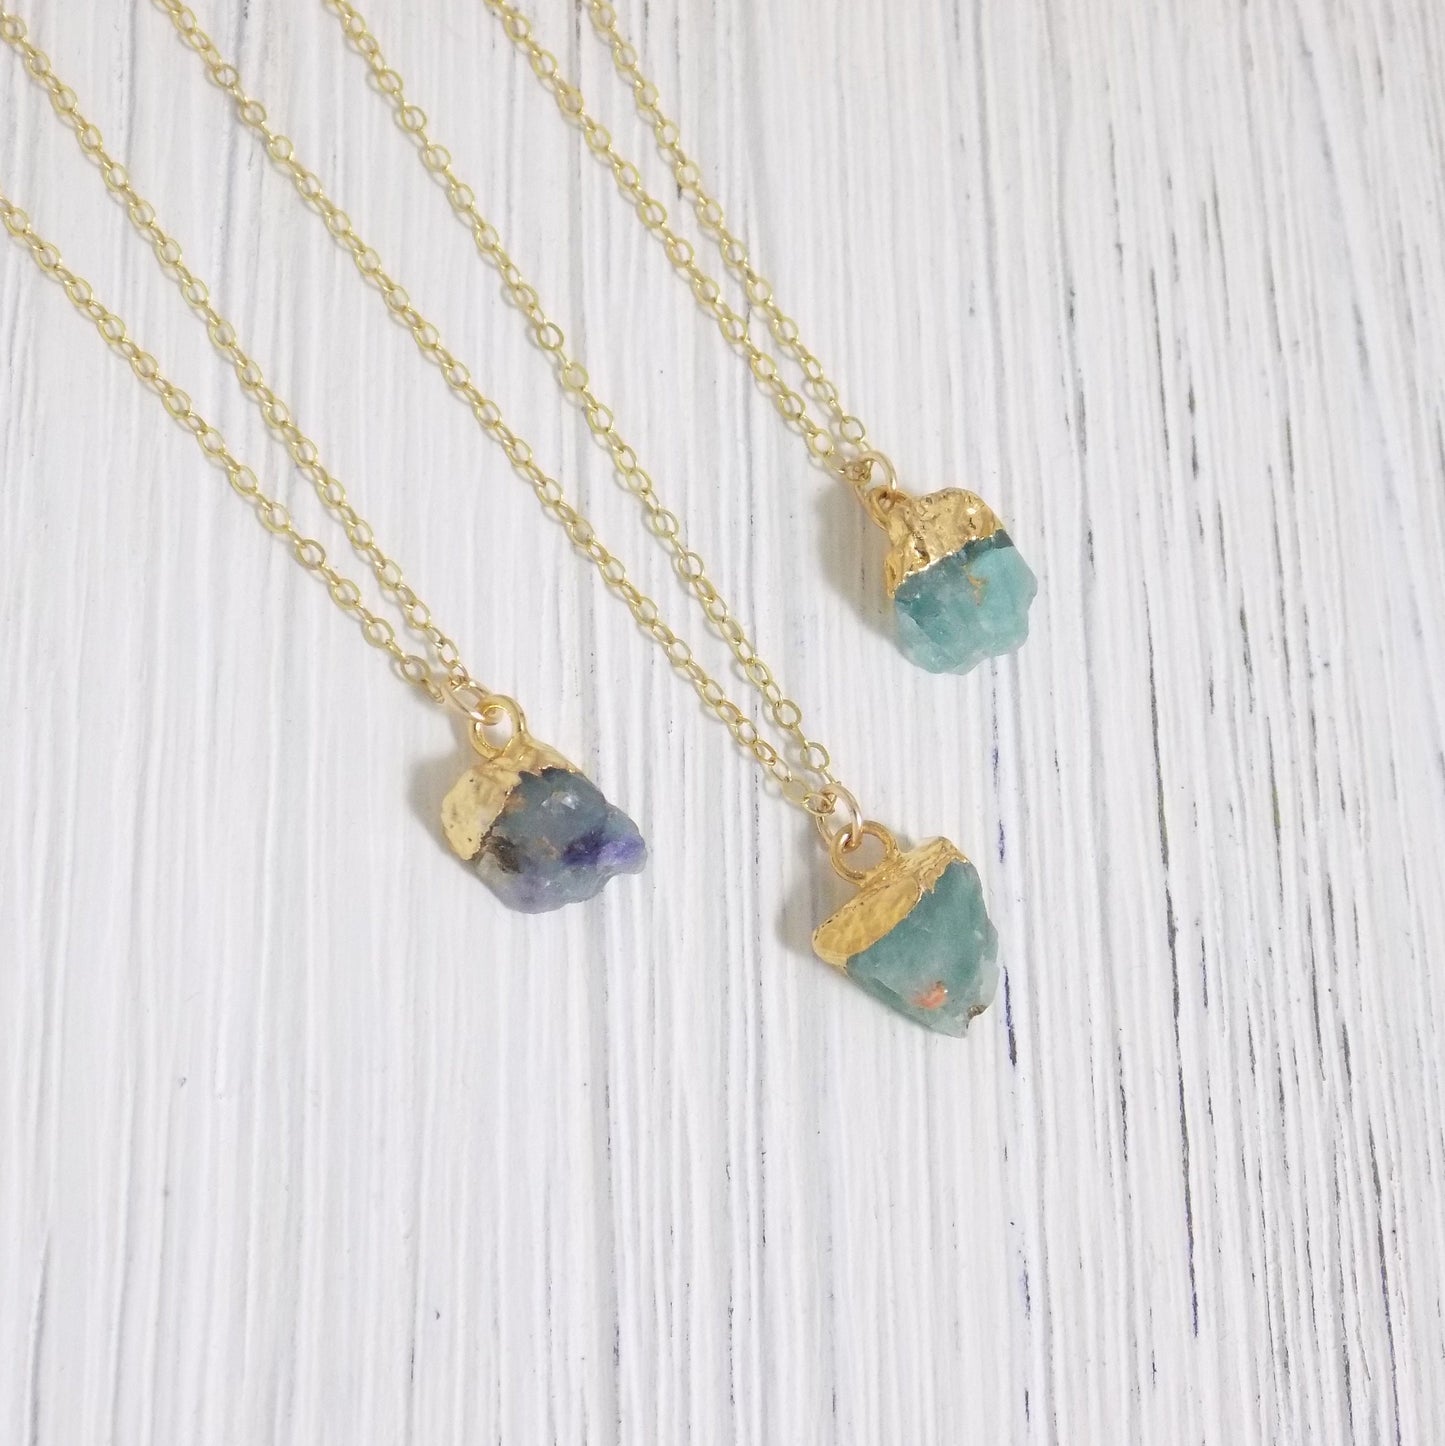 Tiny Raw Fluorite Natural Gemstone Necklaces on 14K Gold Filled Chain, Christmas Gift Women, M1-12